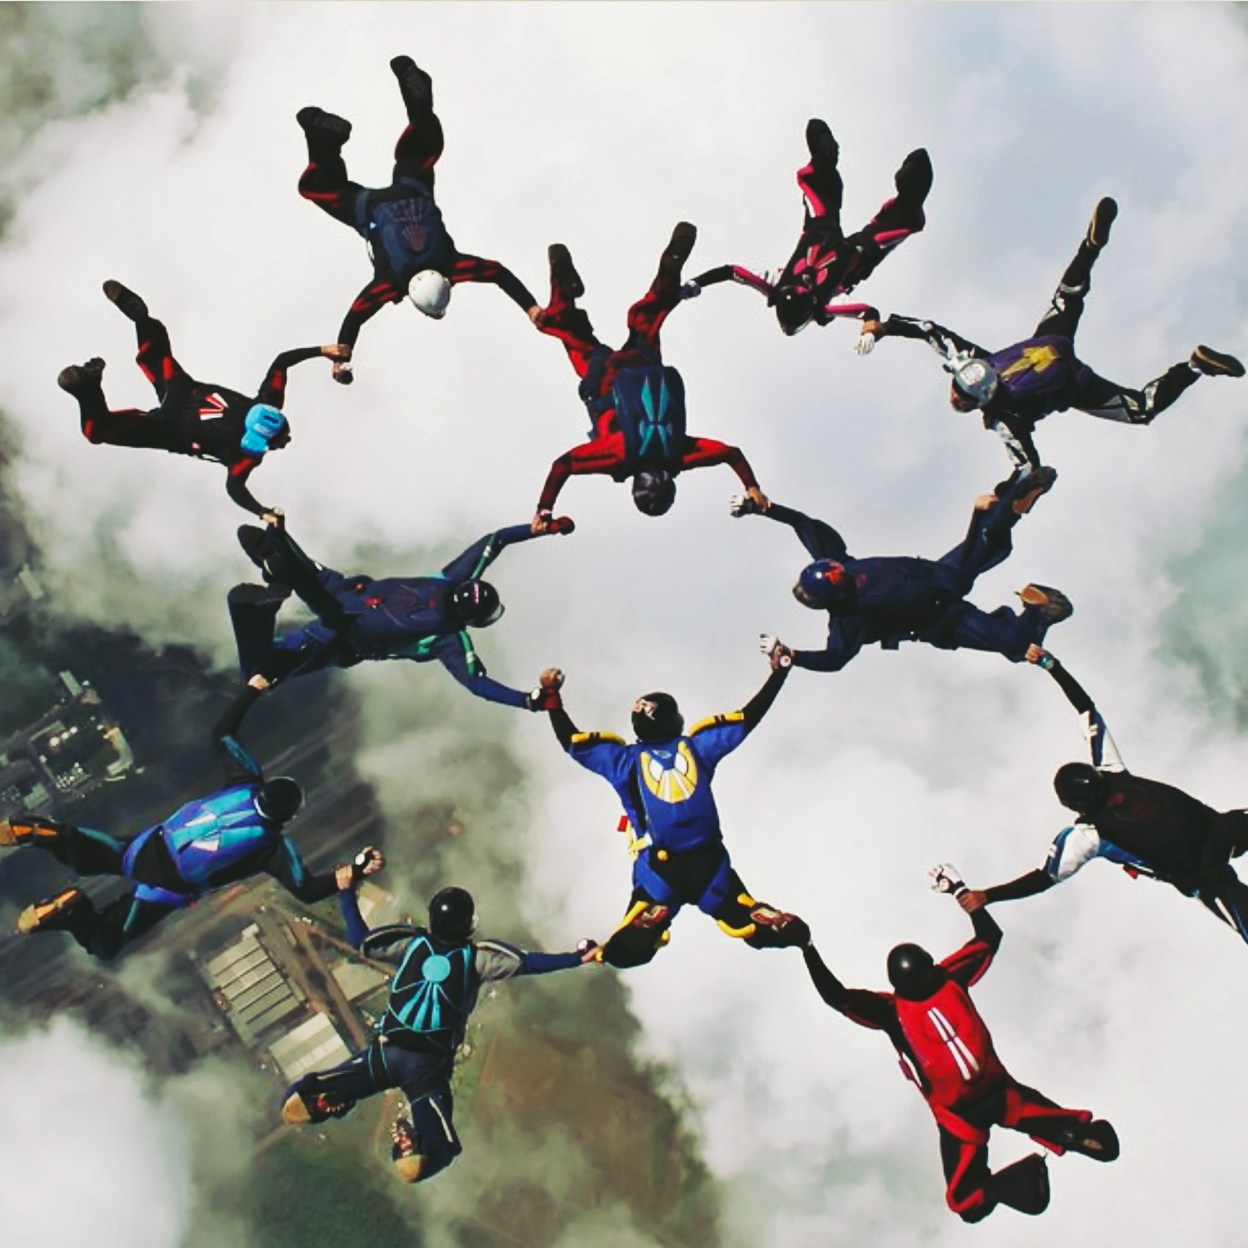 Group of skydivers holding hands